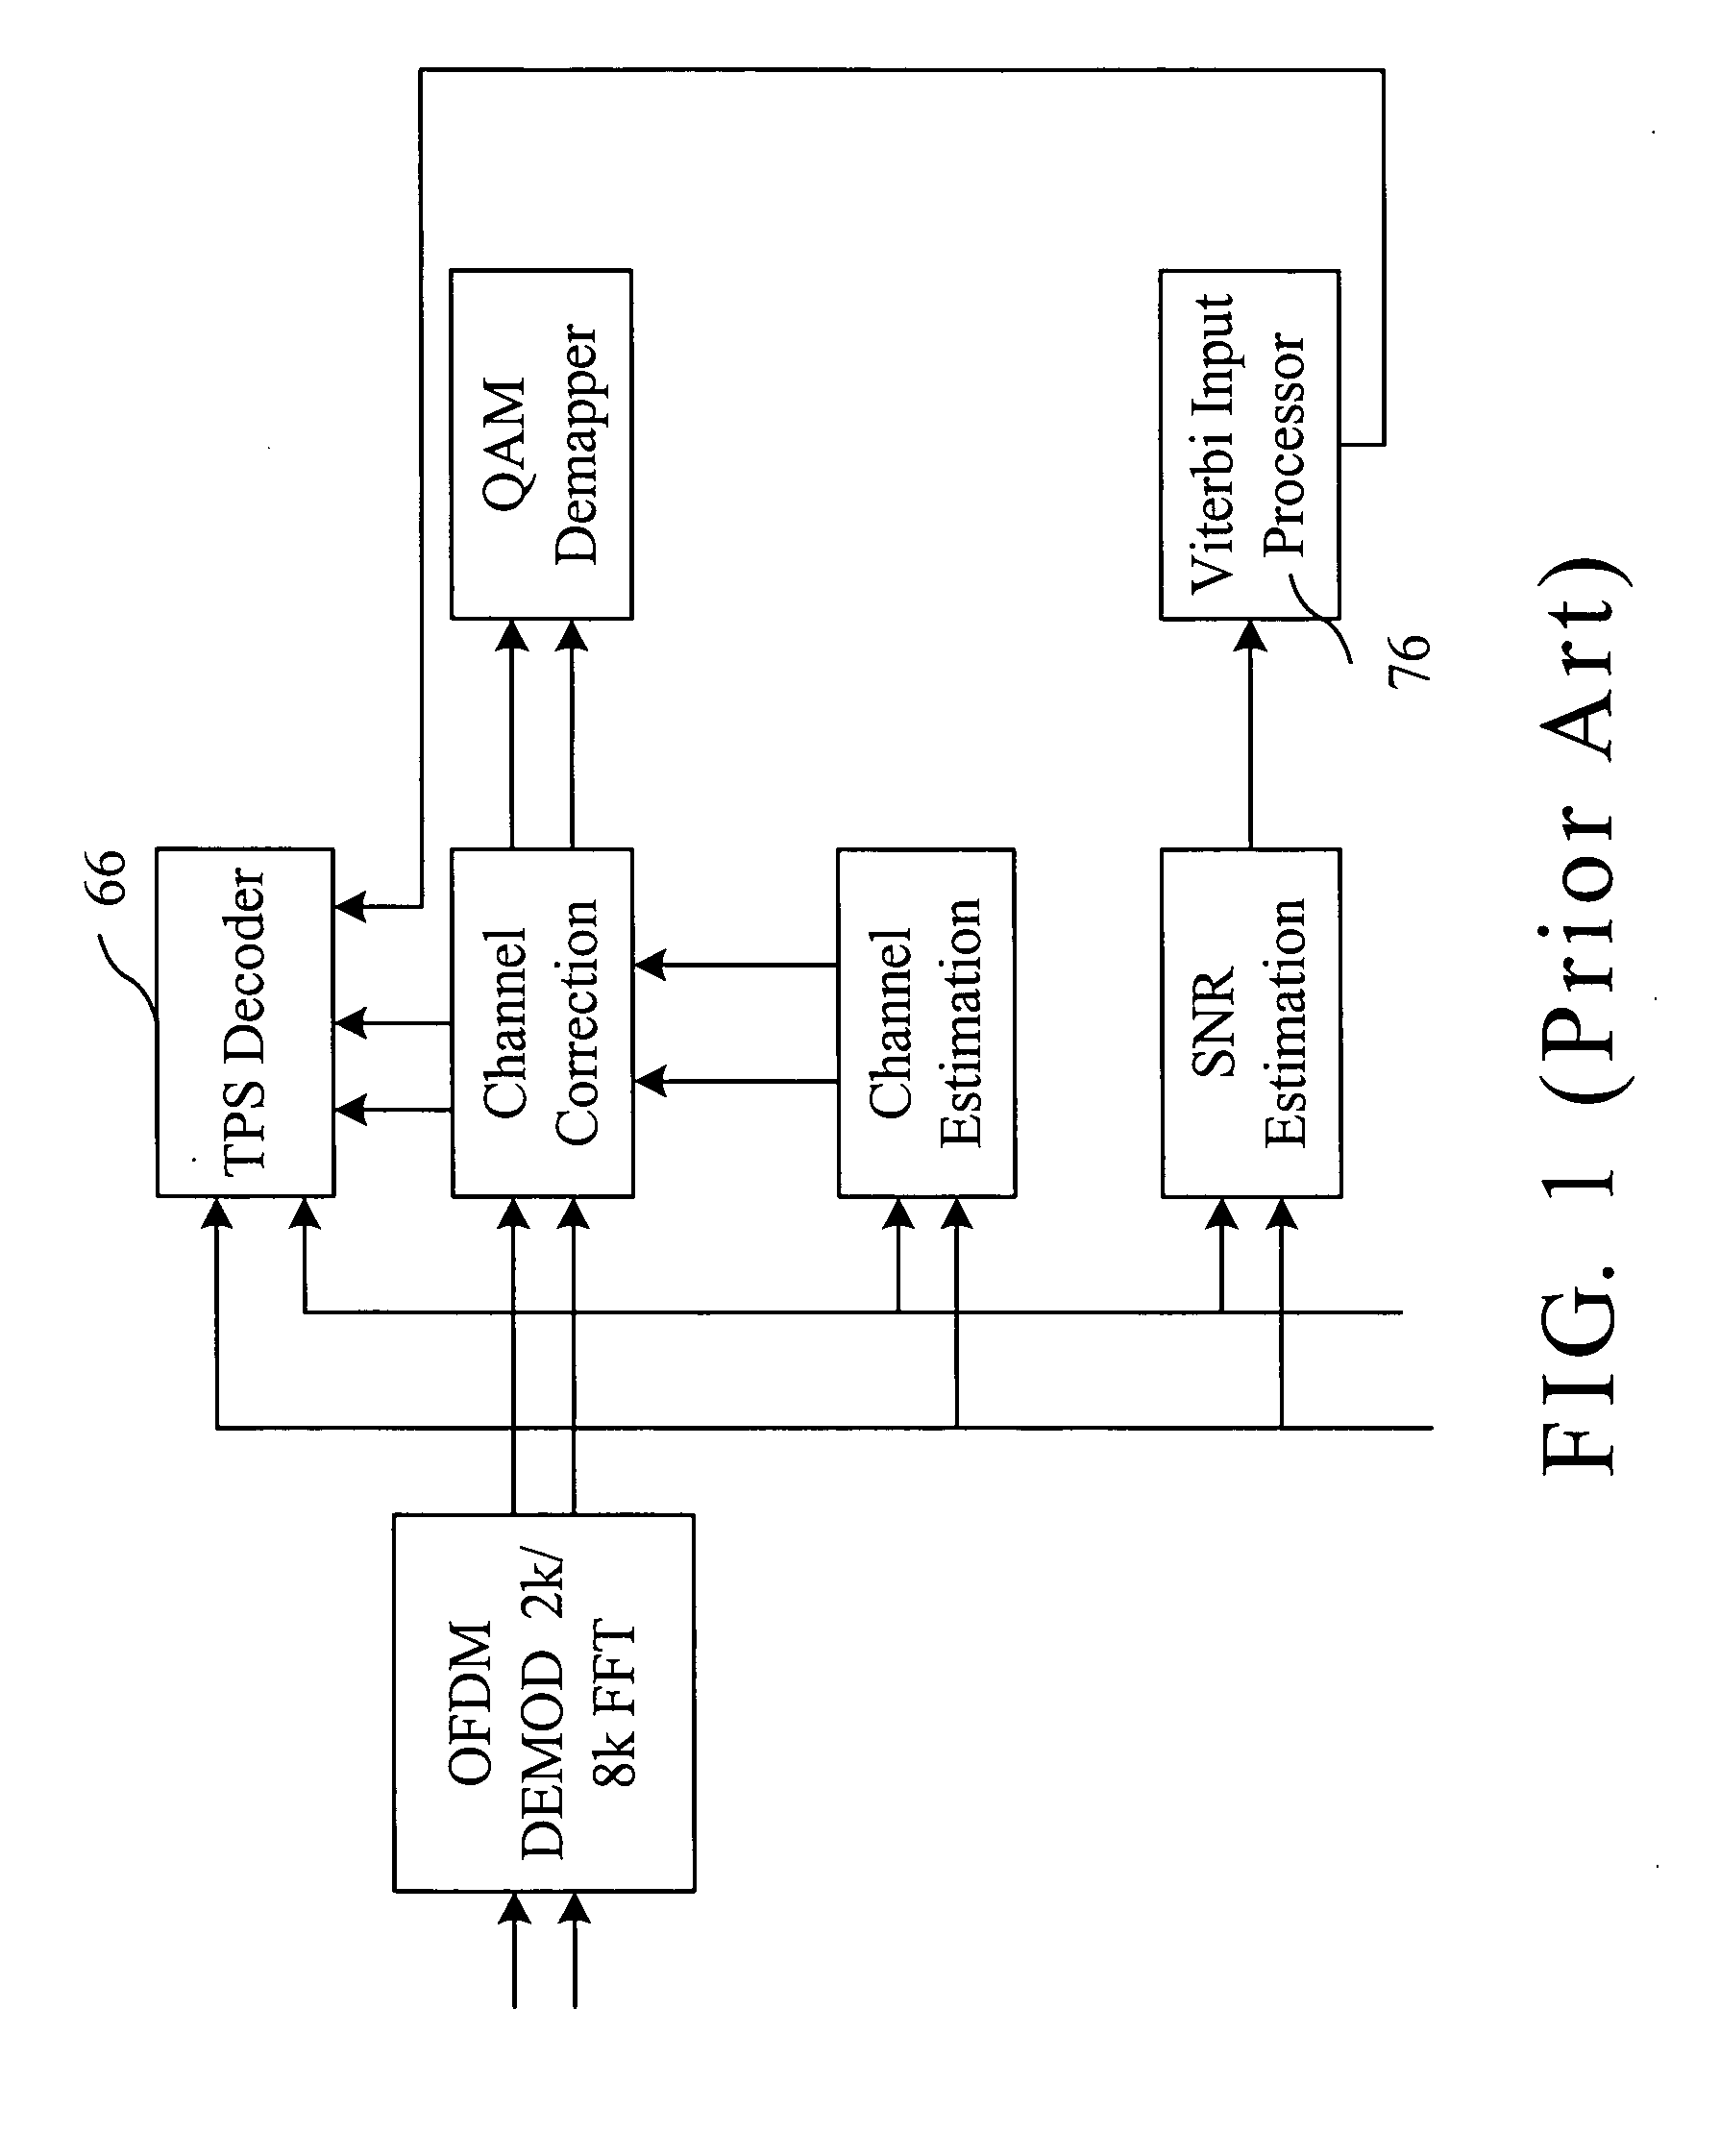 DTMB-based carrier mode detection system and receiving system having the same